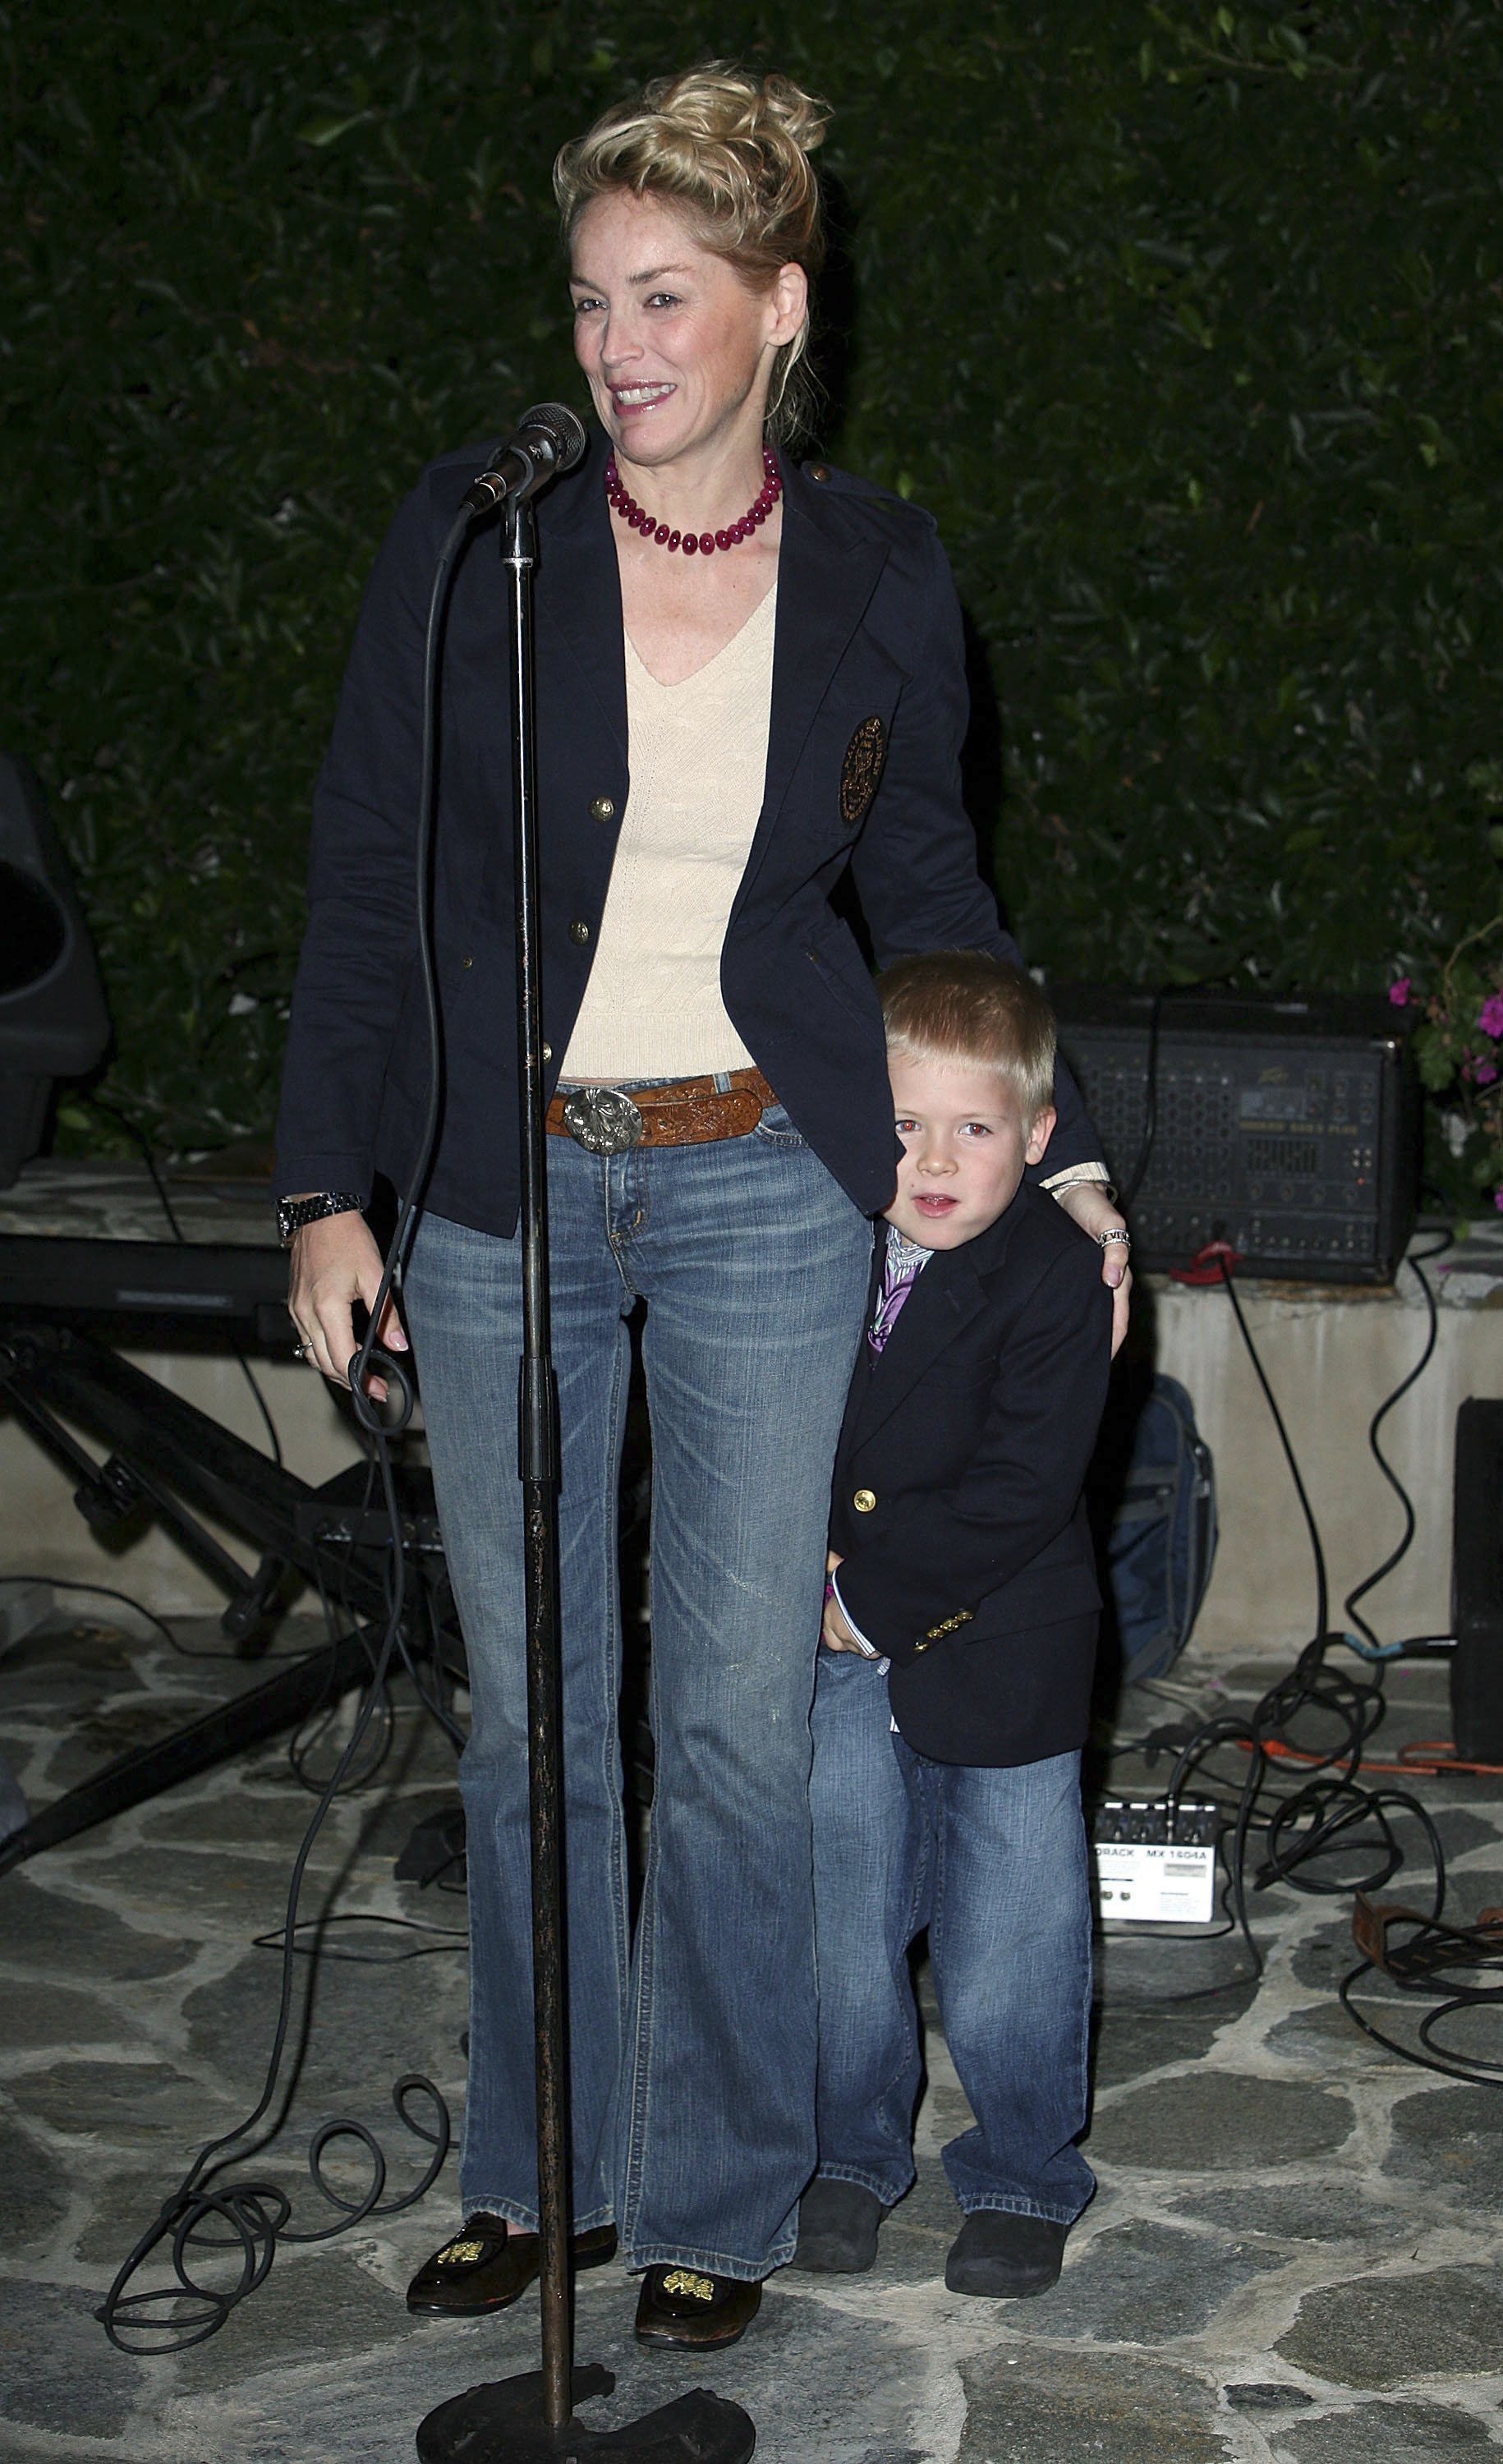 Sharon Stone and Roan Bronstein at The Rhoda Goetz Foundations for Multiple Sclerosis wine tasting fundraiser on November 4, 2006, in Los Angeles, California. | Source: Chad Buchanan/Getty Images